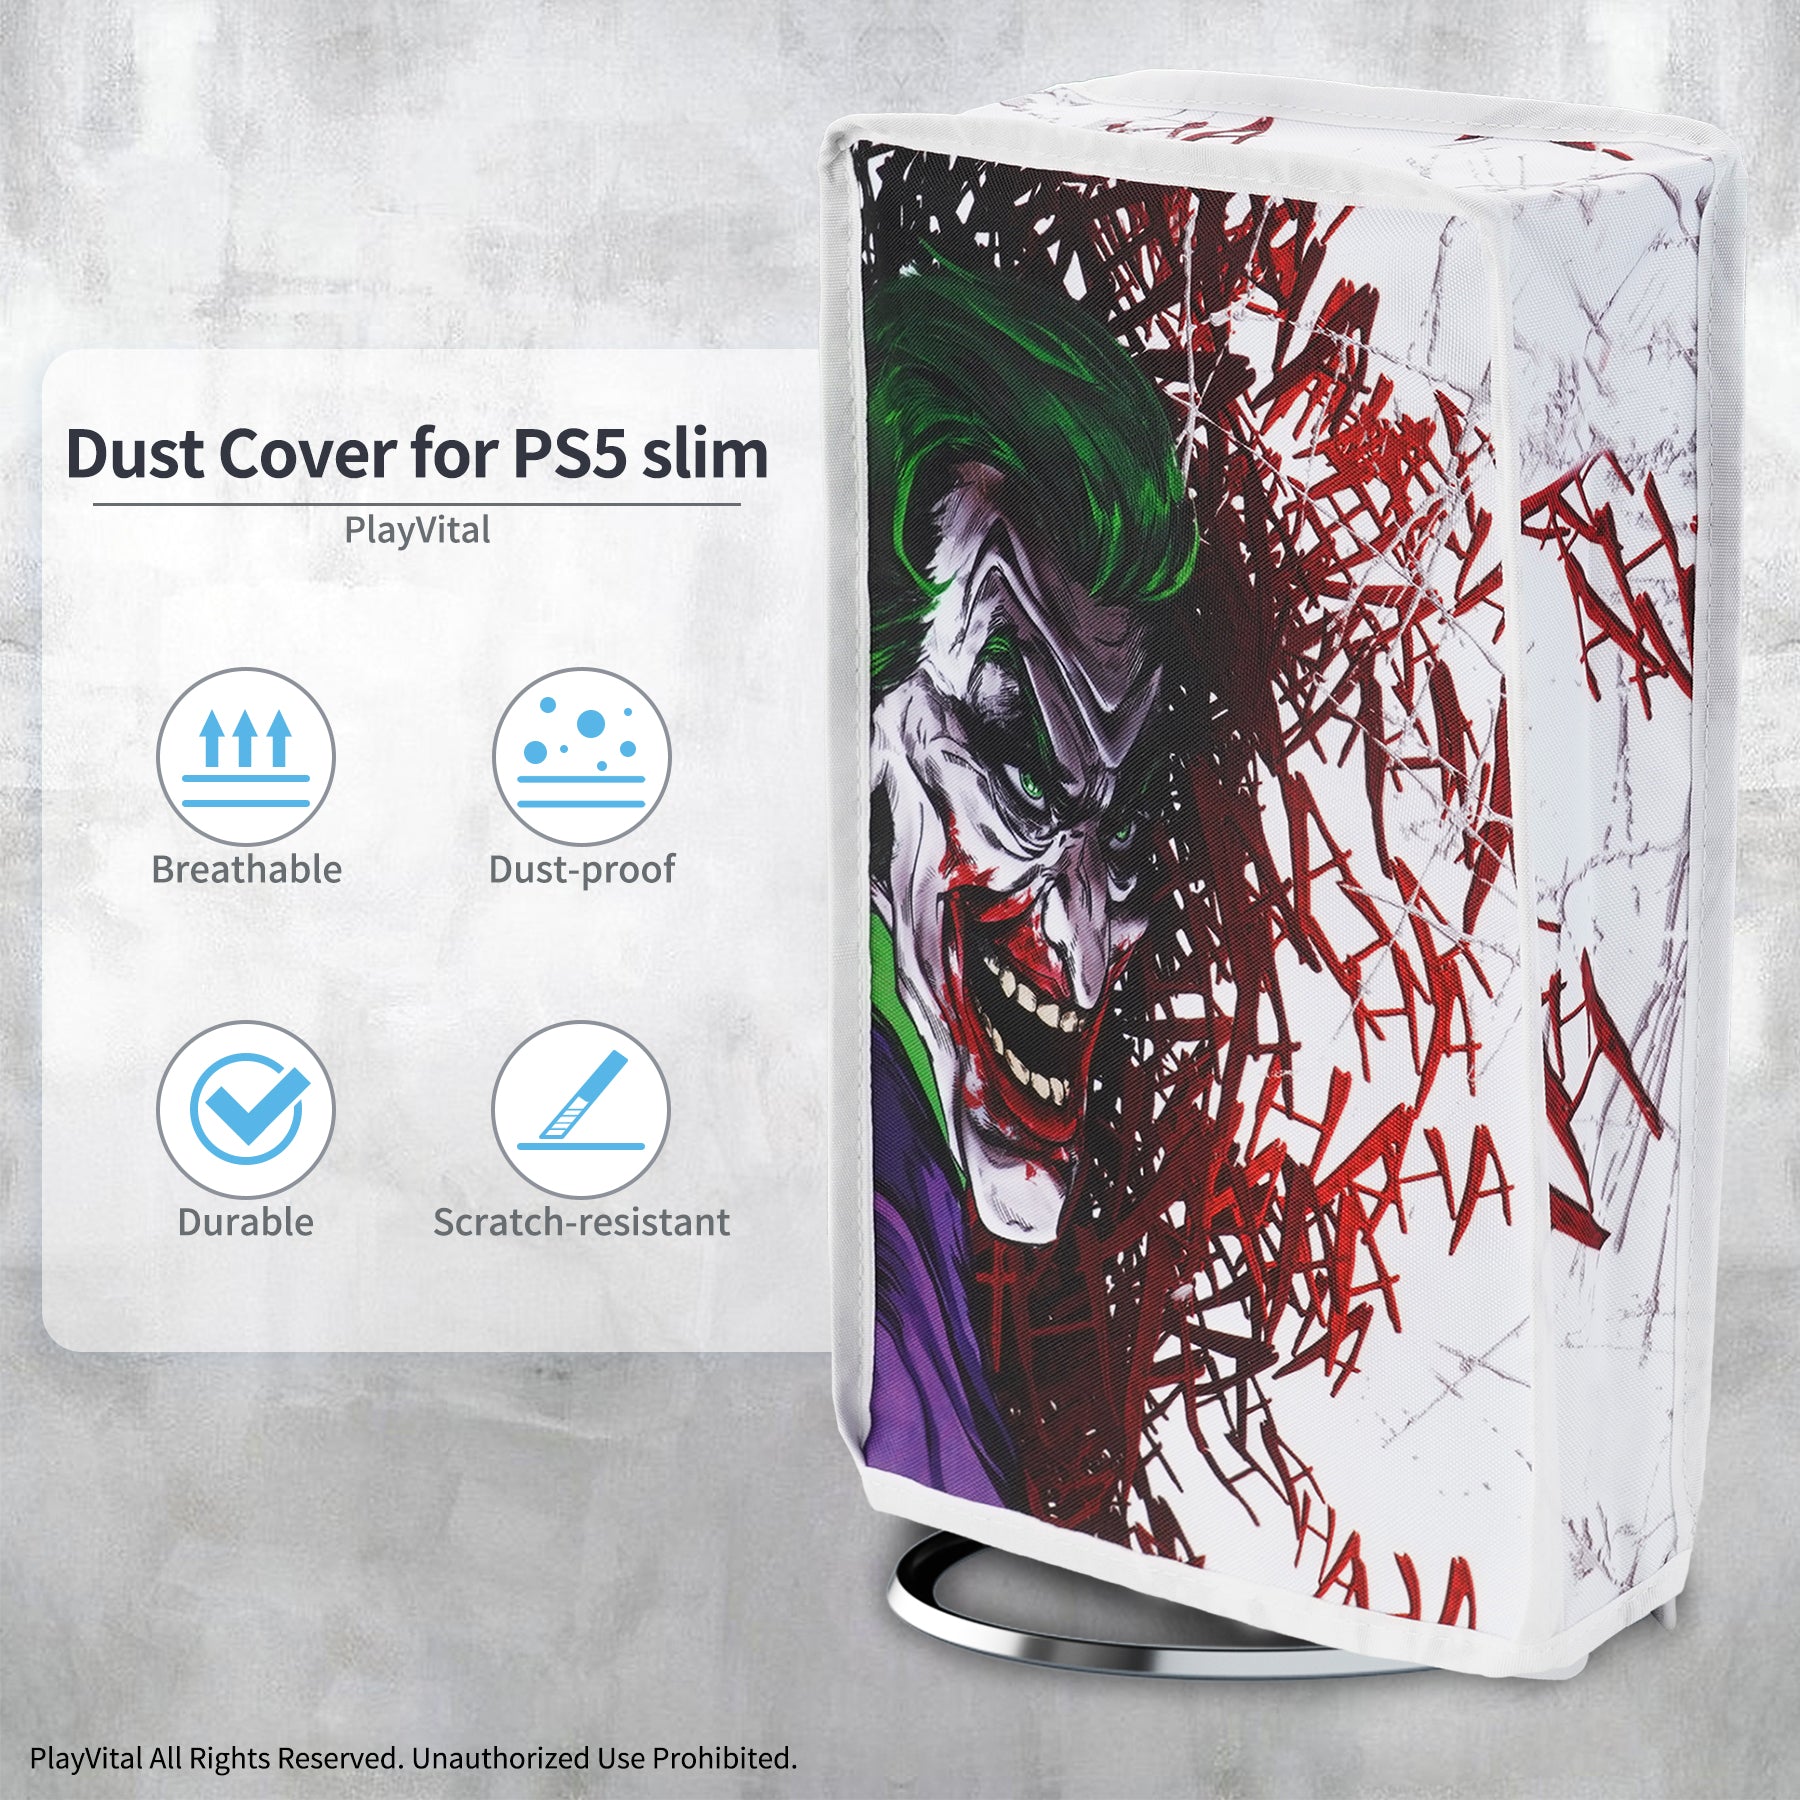 PlayVital Vertical Dust Cover for ps5 Slim Digital Edition(The New Smaller Design), Nylon Dust Proof Protector Waterproof Cover Sleeve for ps5 Slim Console - Clown Hahaha - JKSPFH002 PlayVital